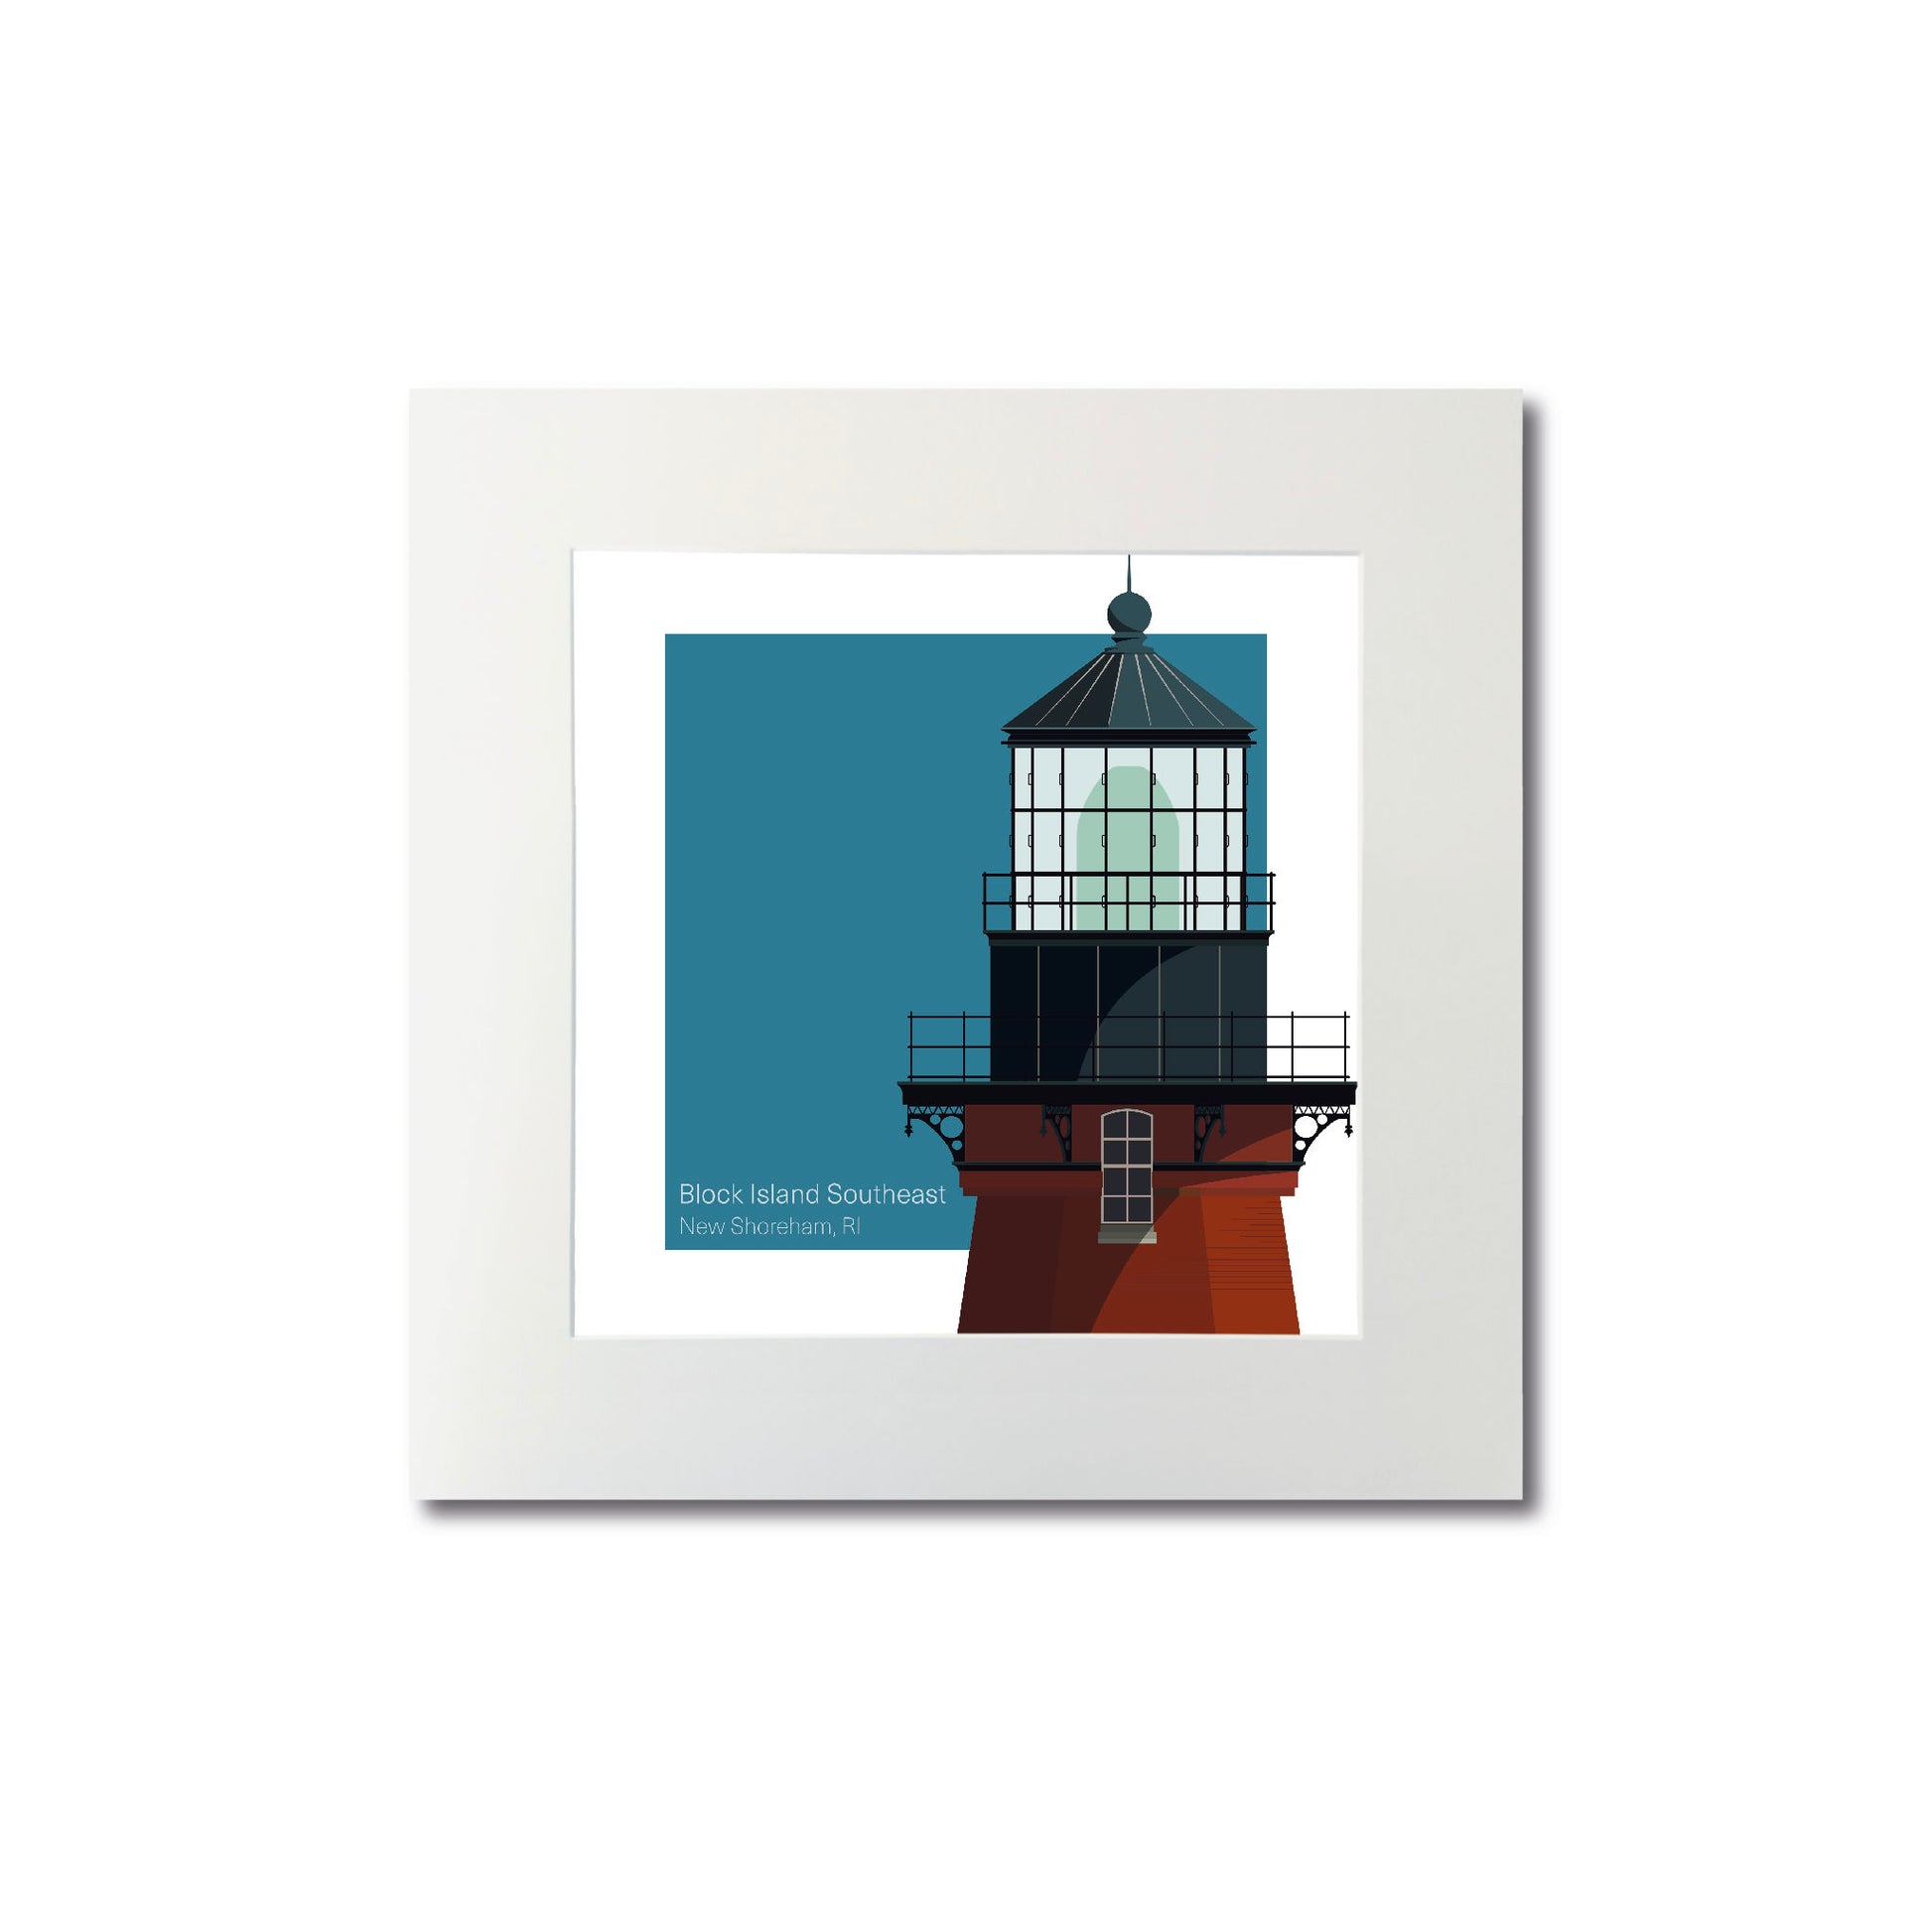 Illustration of the Block Island Southeast lighthouse, RI, USA. On a white background with aqua blue square as a backdrop., mounted and measuring 8"x8" (20x20cm).